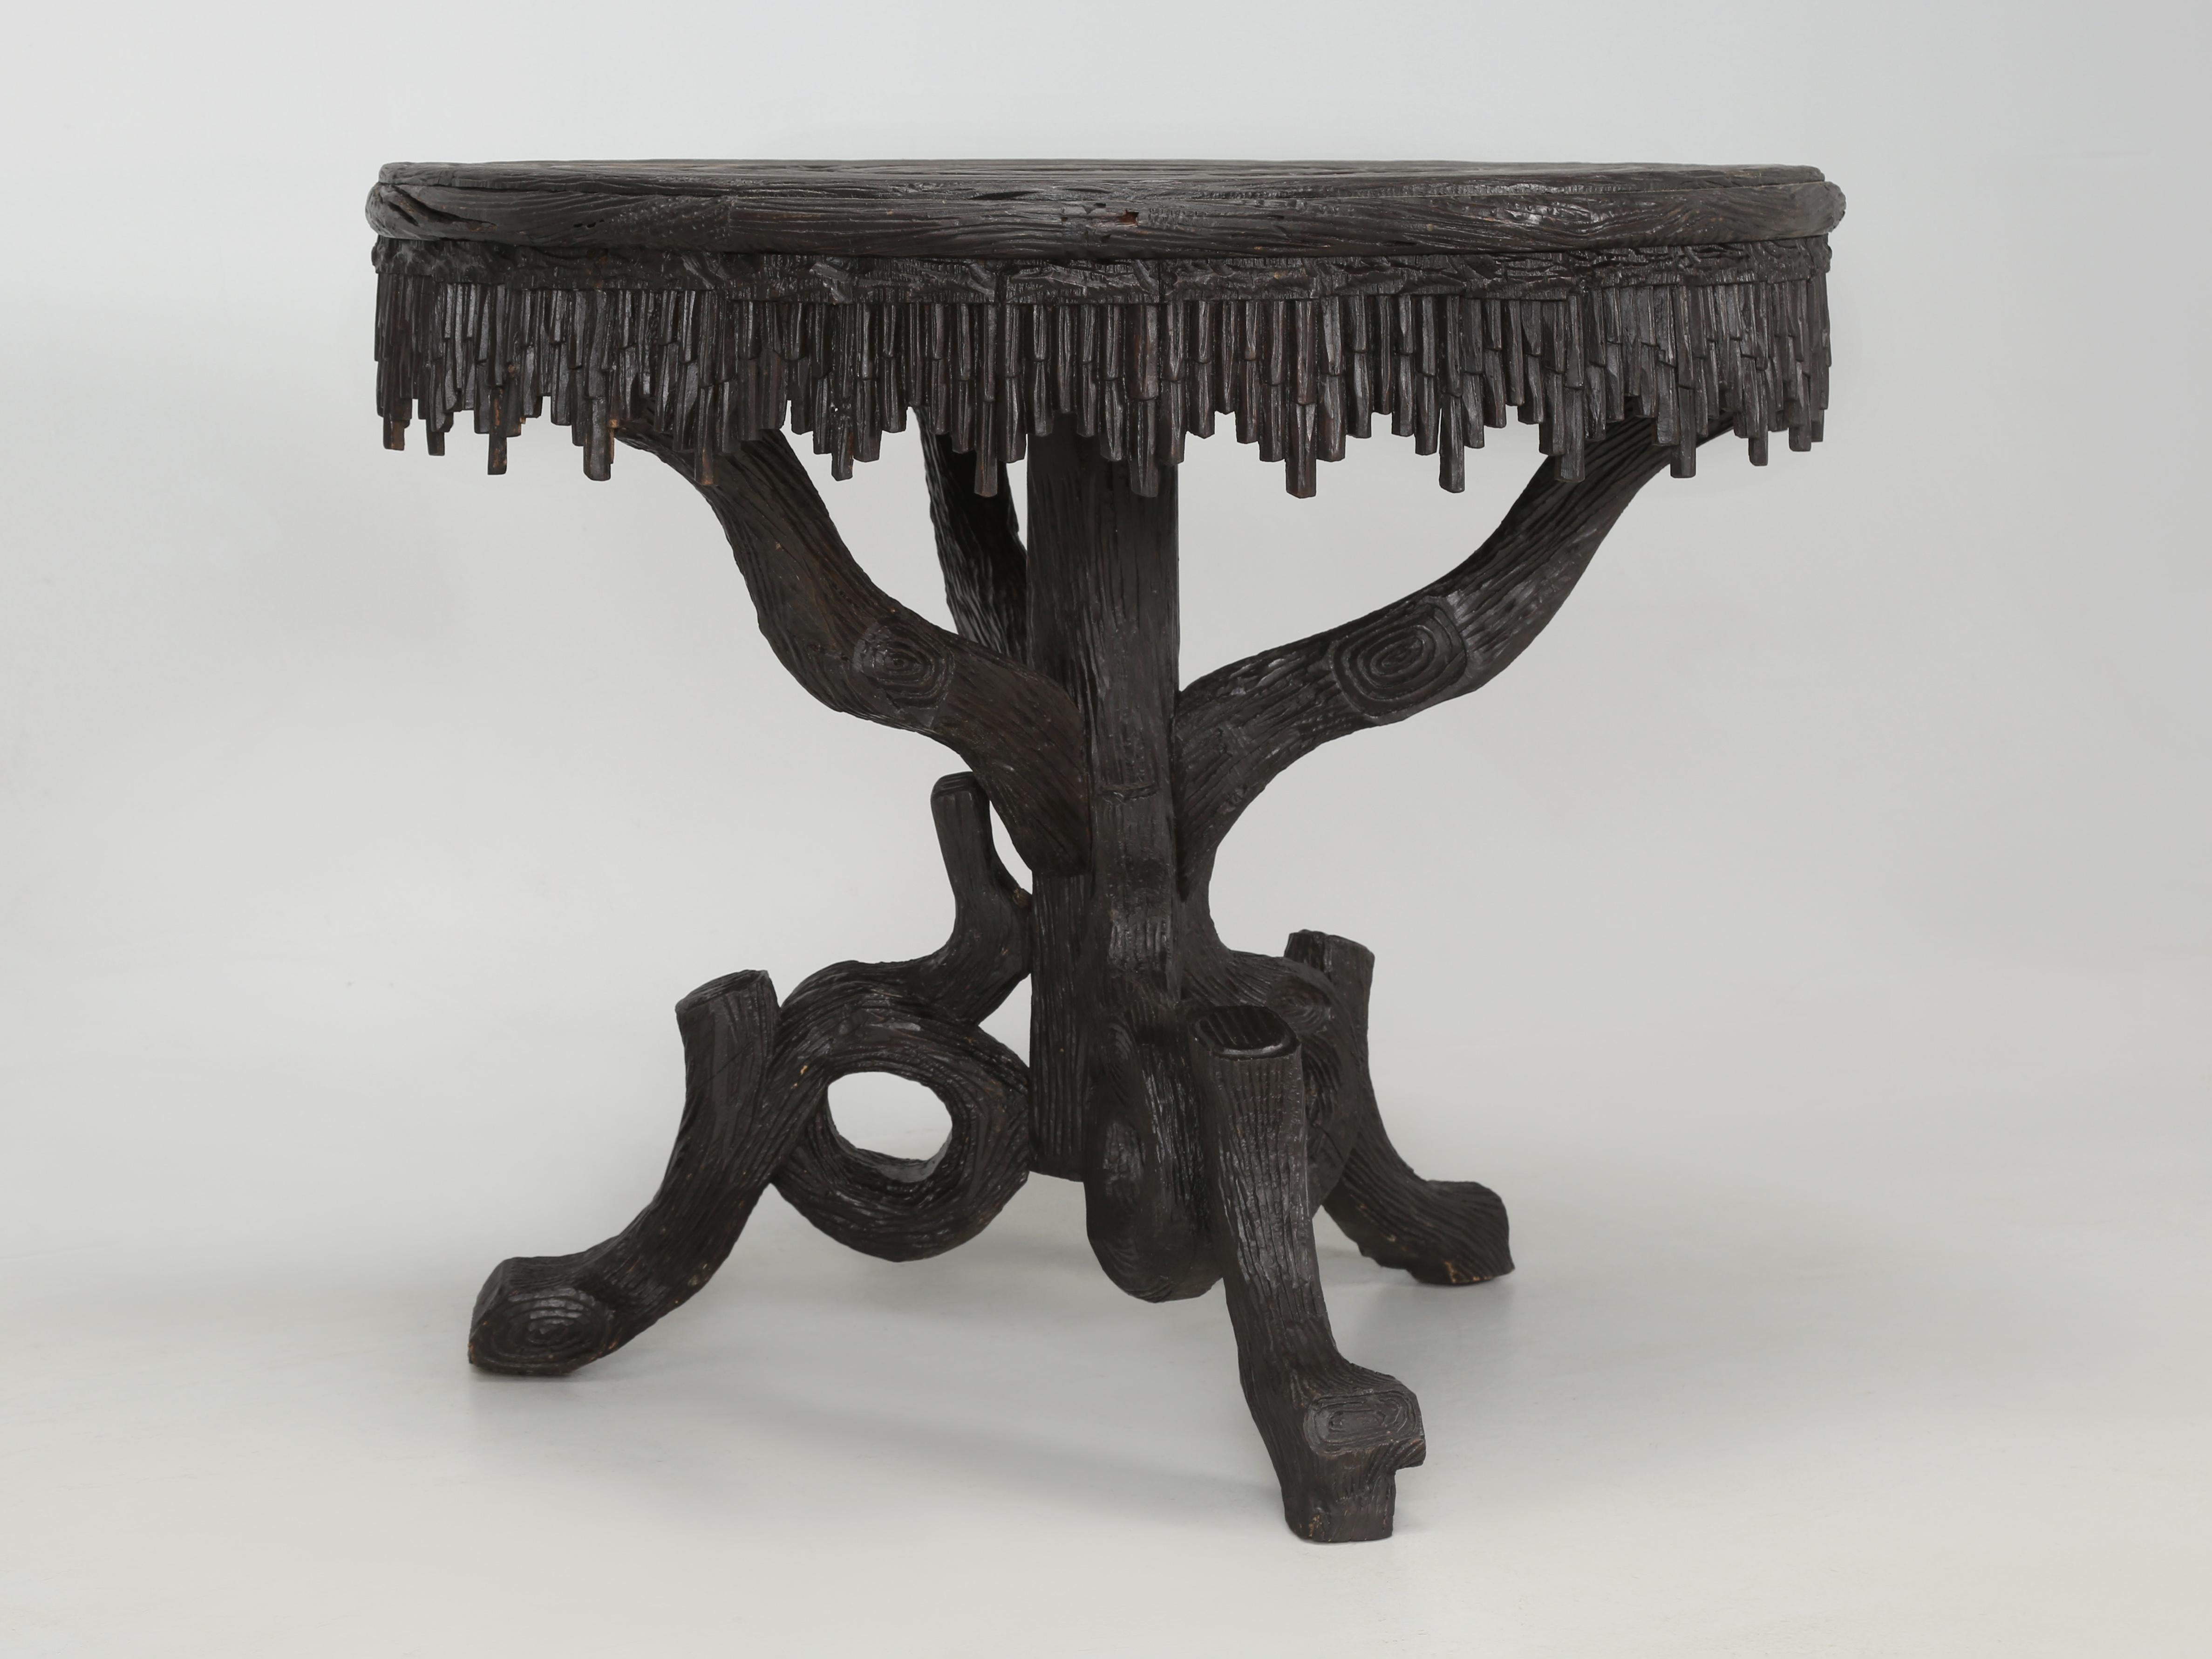 Hand-Carved Black Forest Furniture Beautiful Small Dining Table, Game Table Matching Chairs